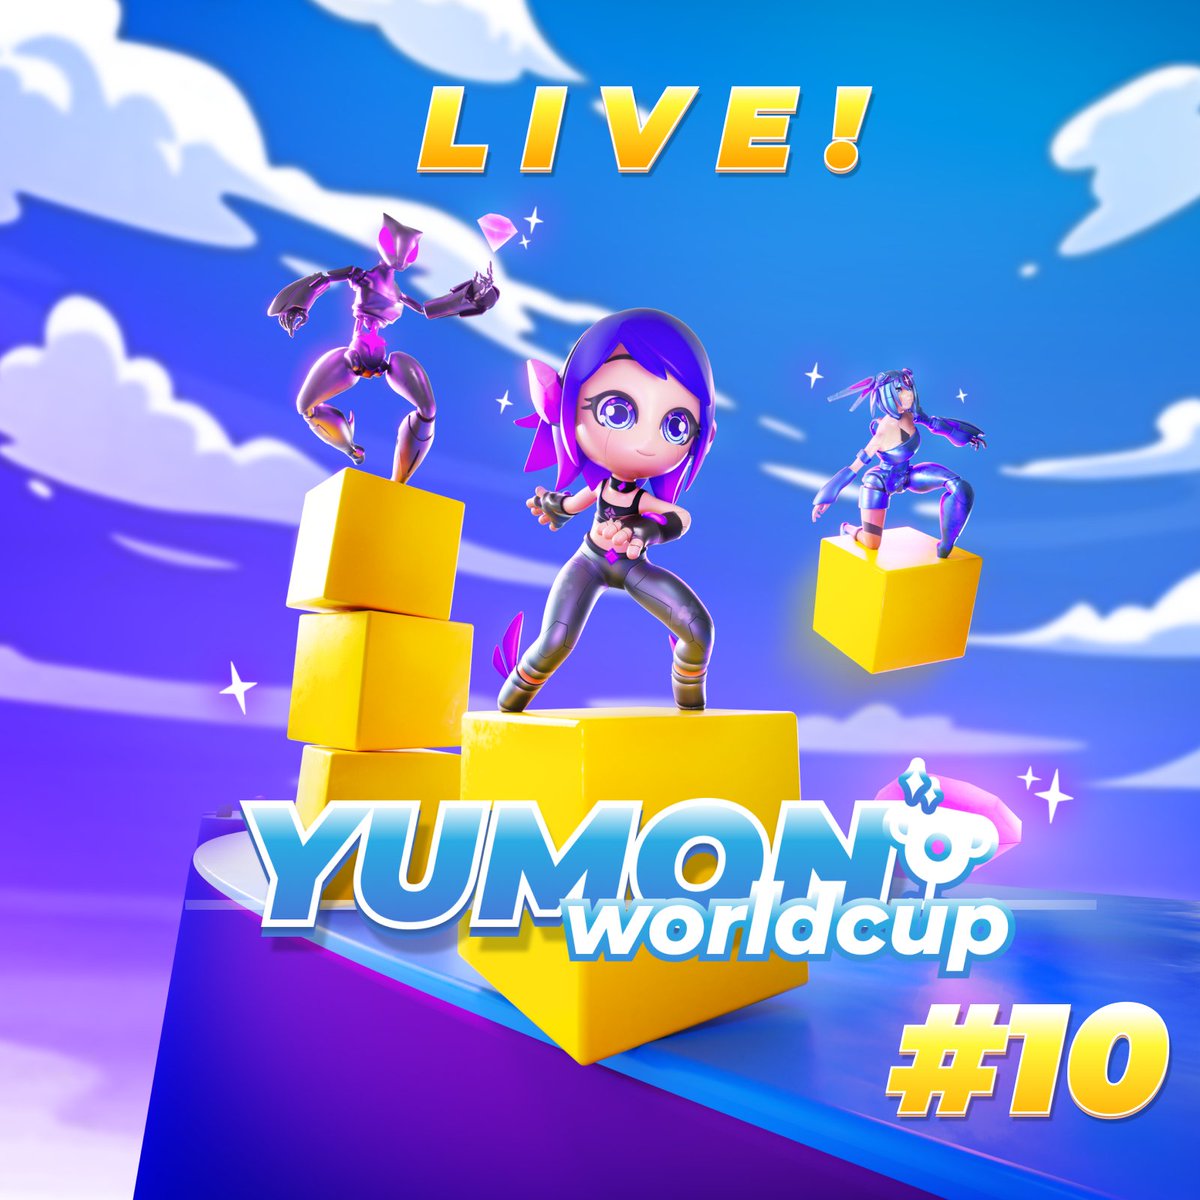 🚀 World Cup #10 has arrived! 🏆 Compete now in 3 different leagues 🔥 Awesome rewards & prizes await you 💎 Download Chill Ride (iOS + Android): links.yumon.world/games